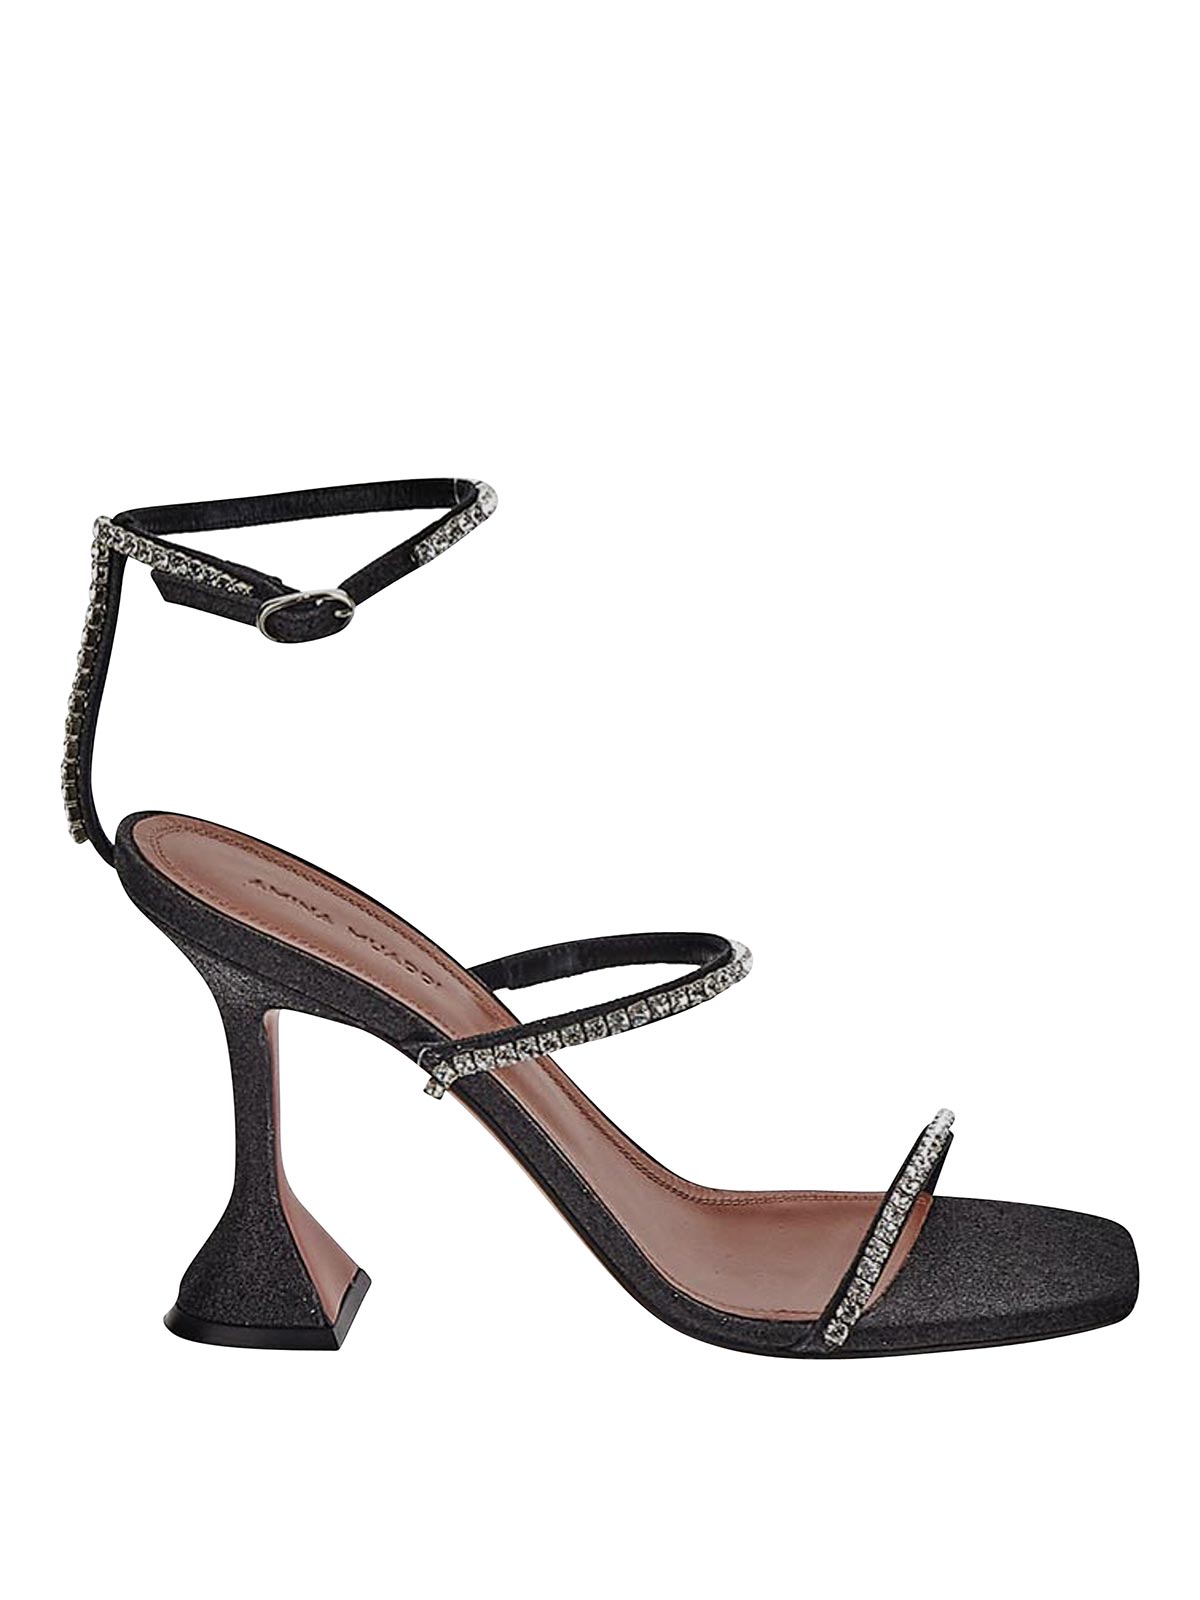 Shop Amina Muaddi Sandal In Black With On The Straps